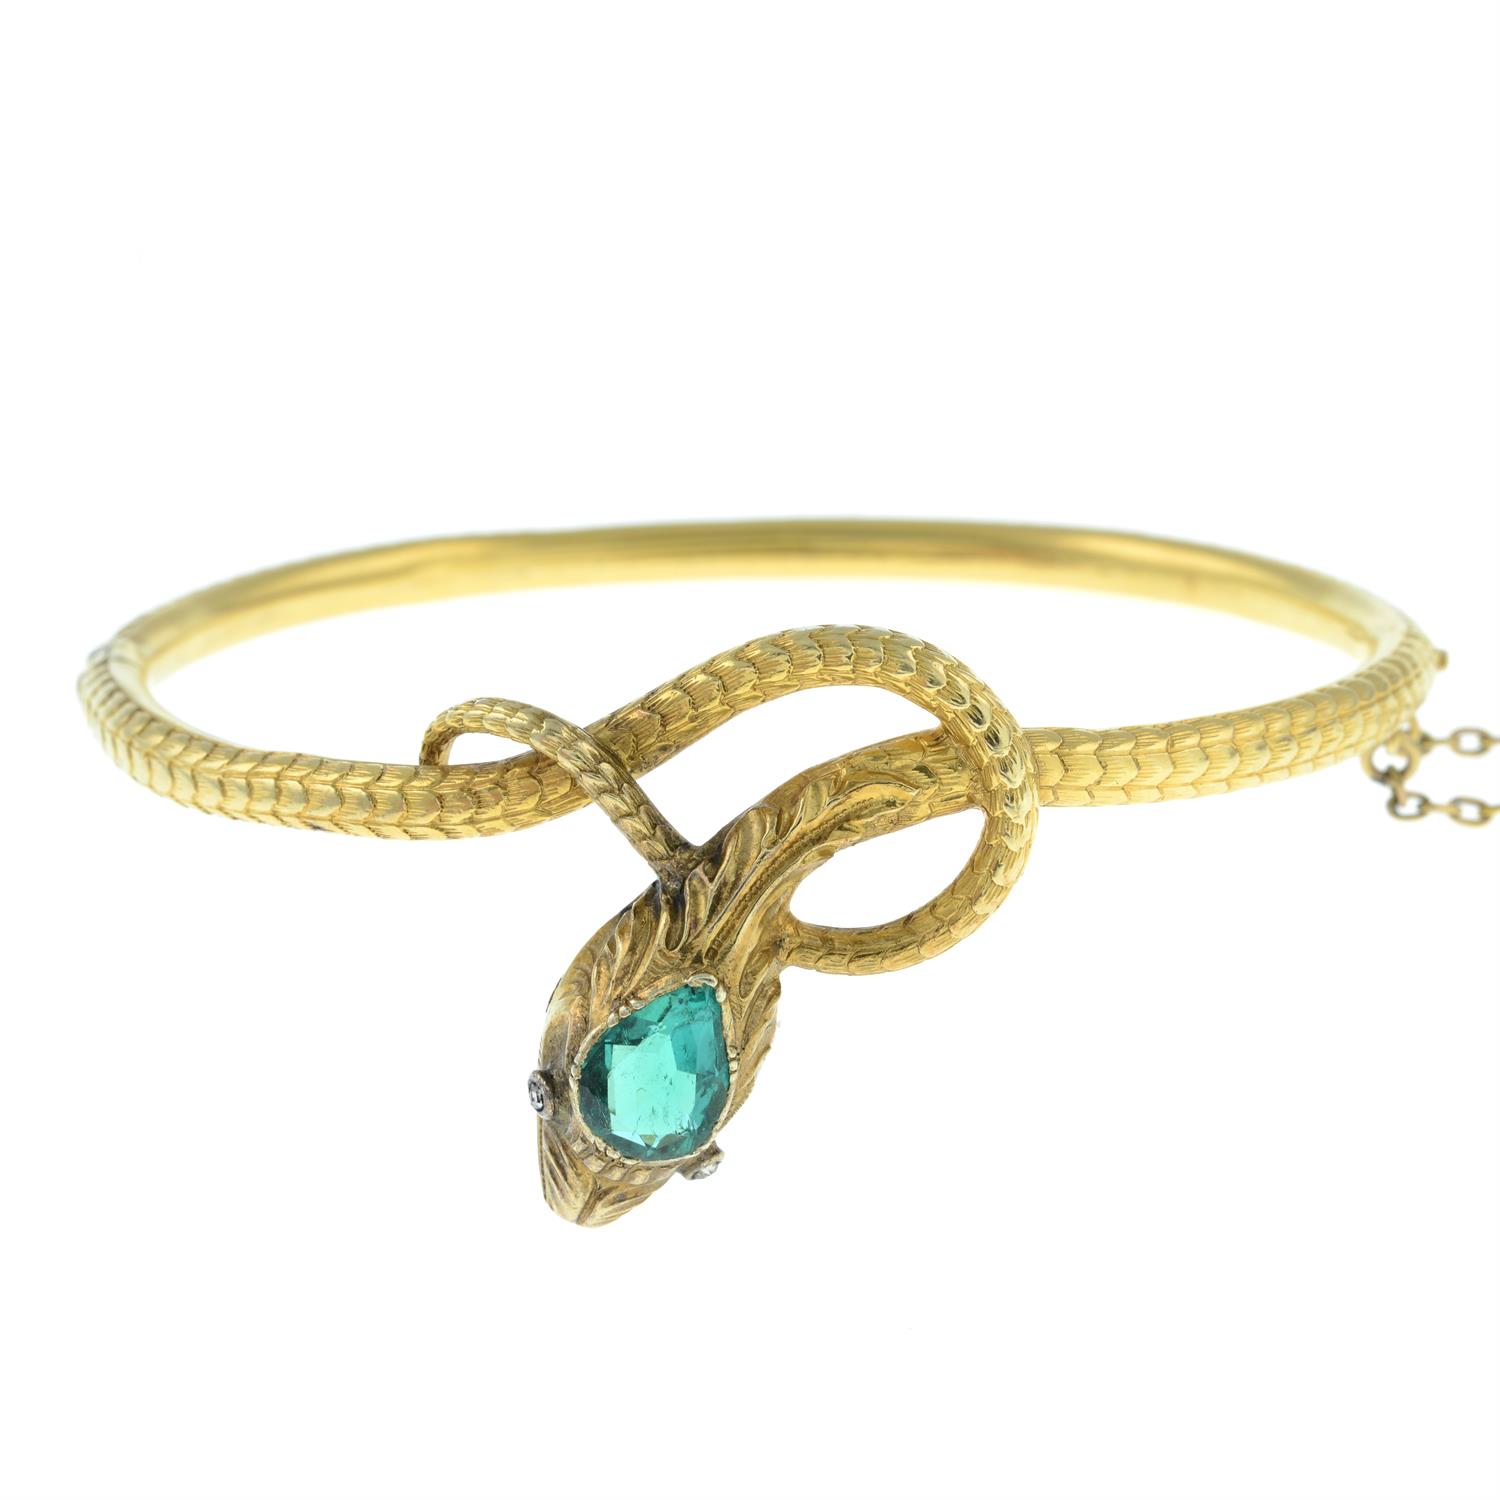 An early 19th century 18ct gold engraved snake bangle, with Colombian emerald crest and diamond - Image 2 of 4